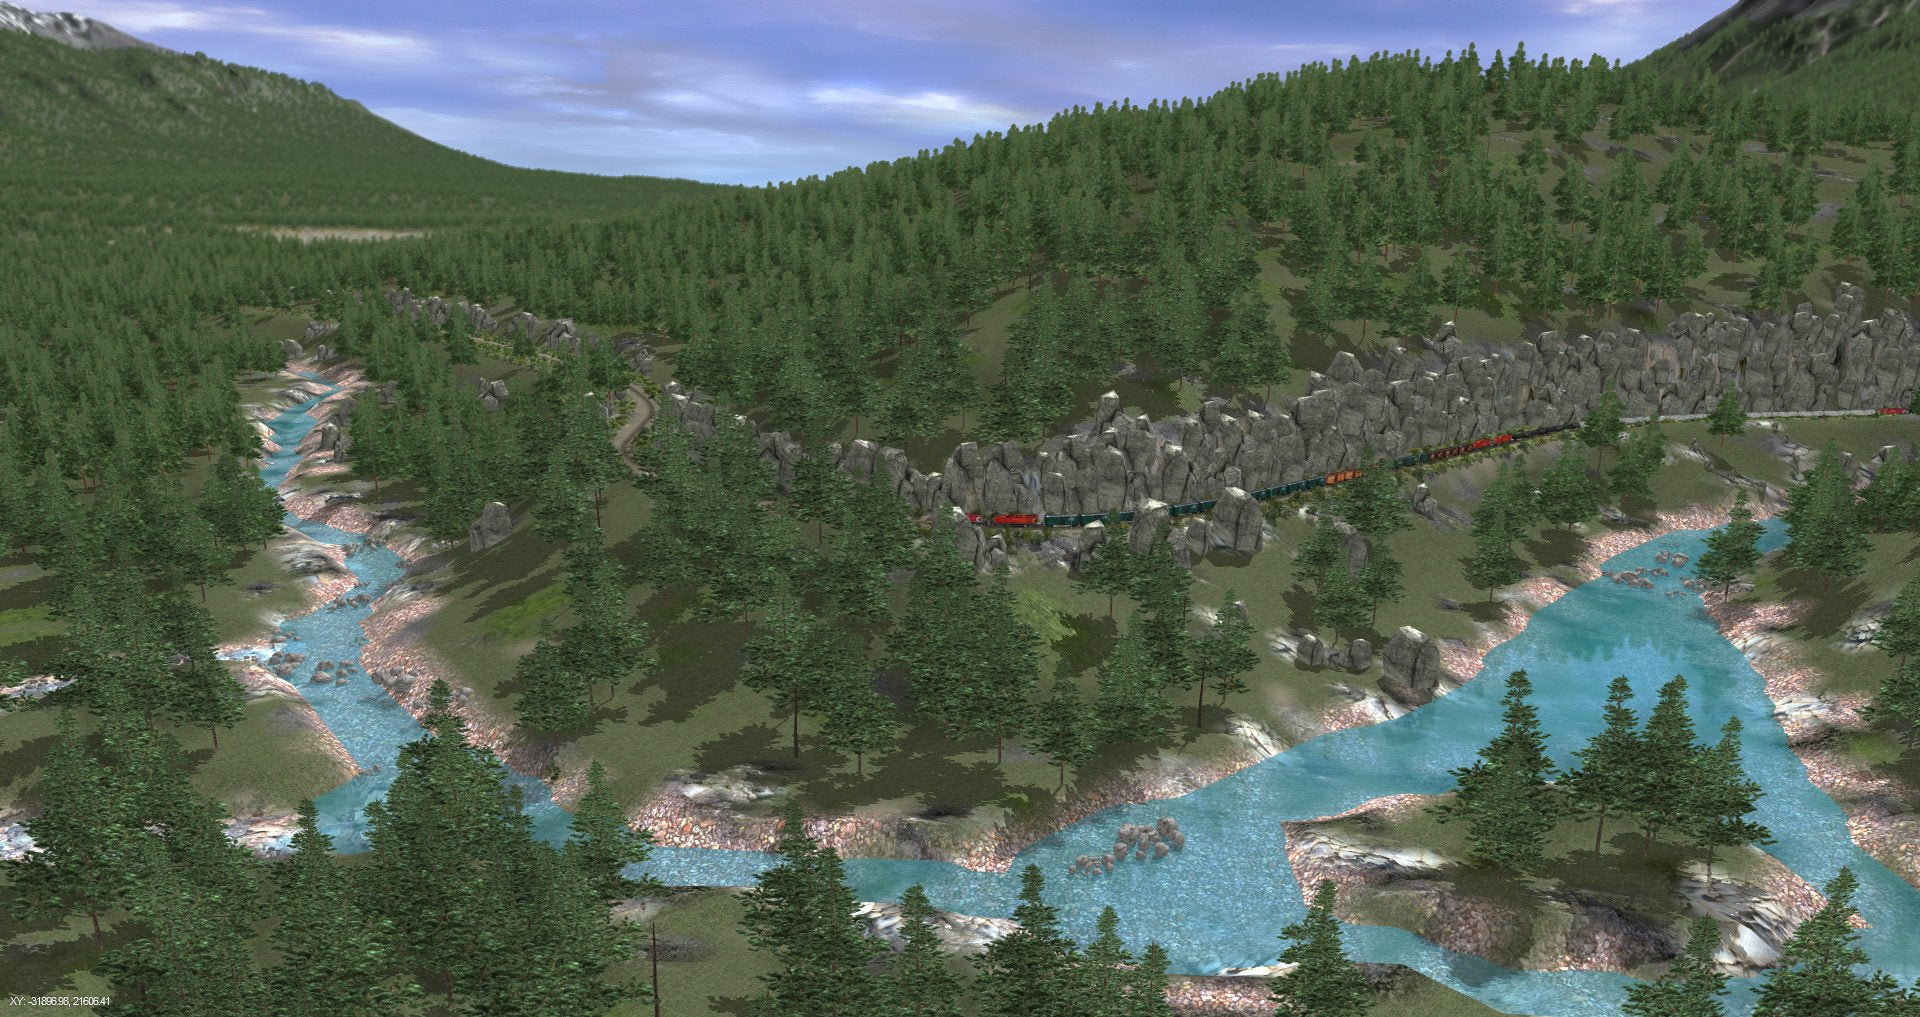 Trainz Route: Canadian Rocky Mountains Columbia River Basin